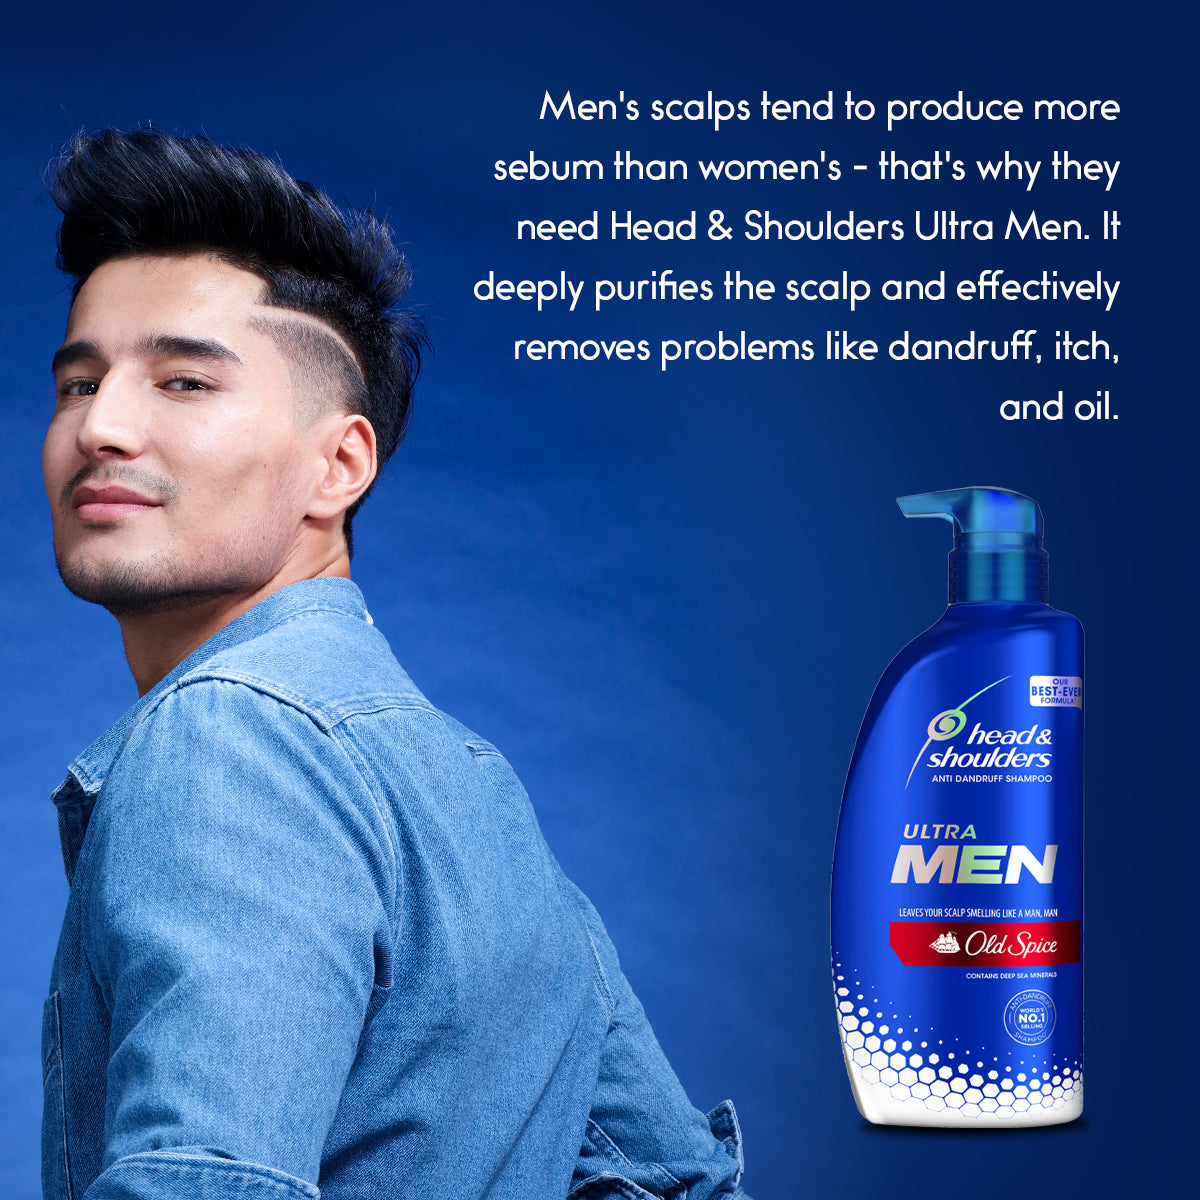 Head & Shoulders Shampoo with Old Spice for Men 720ml [Anti-Dandruff]